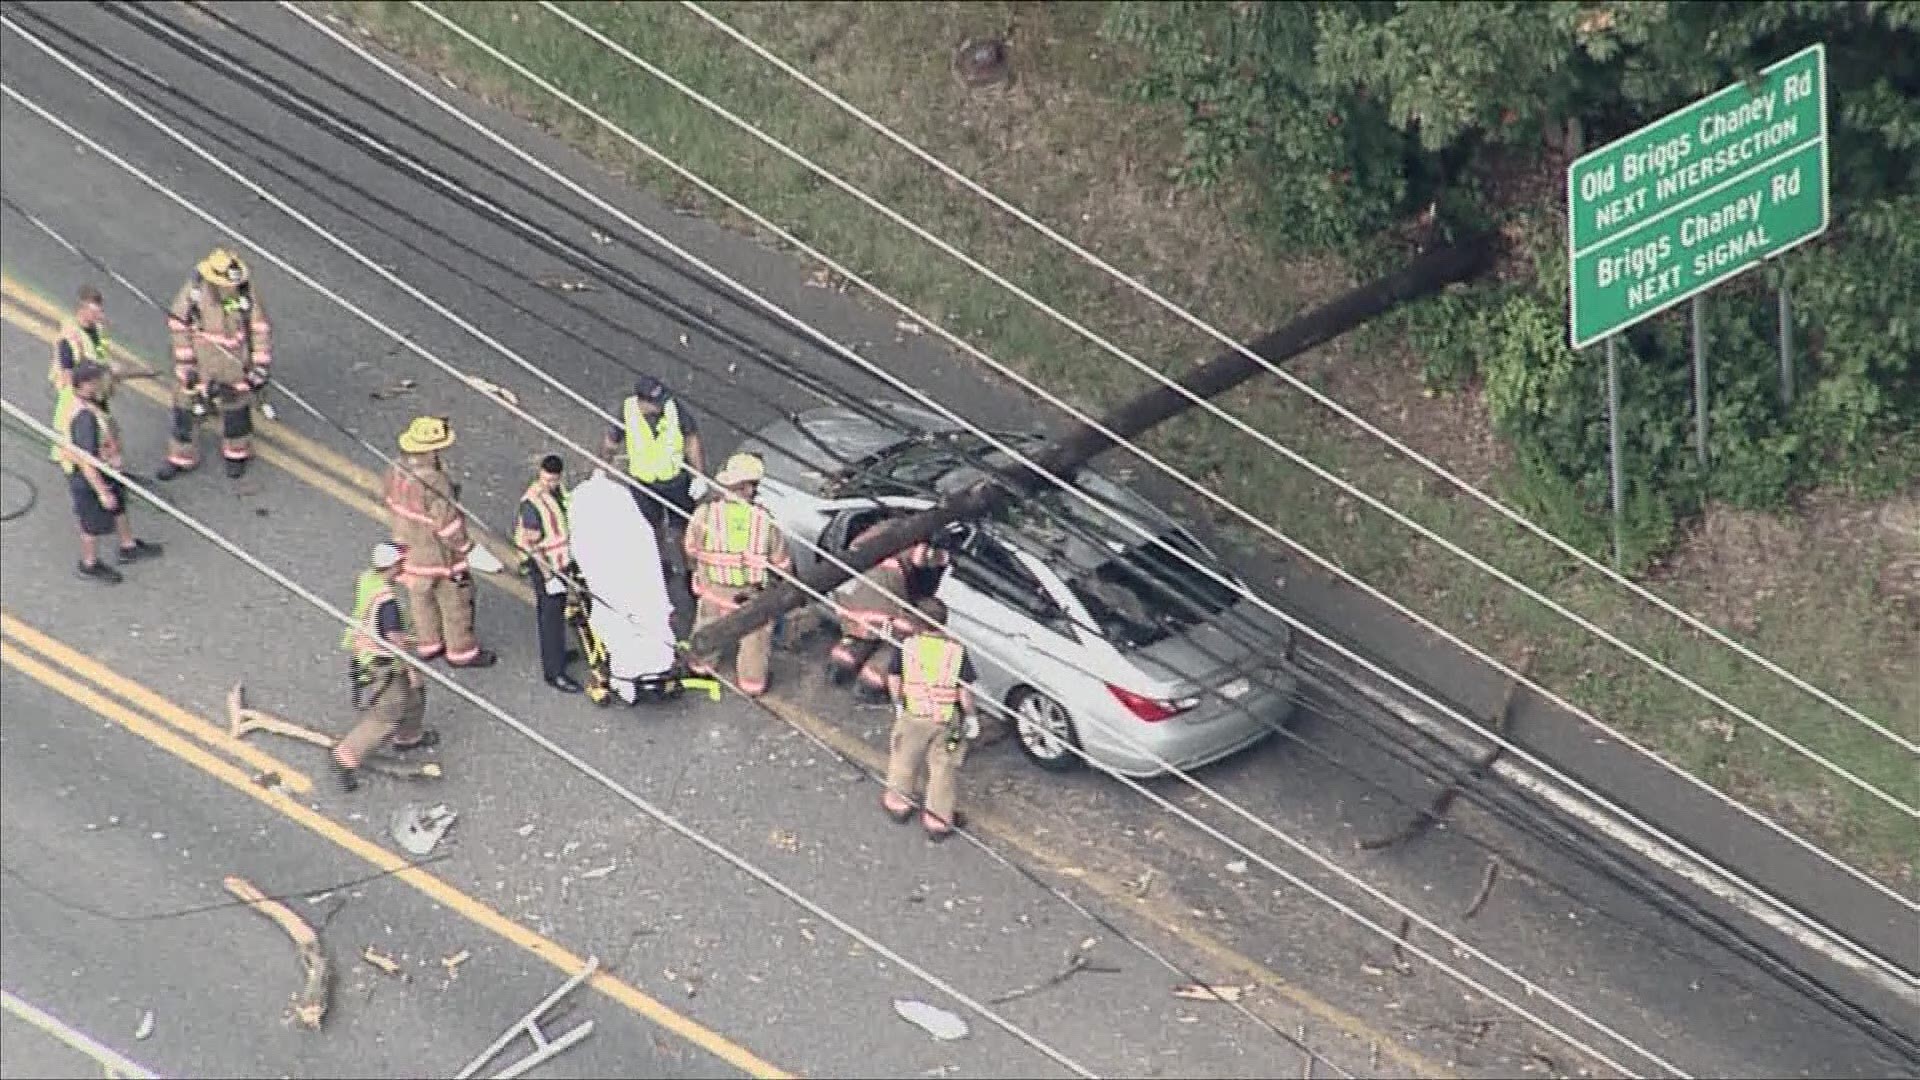 A man was rescued after at least two utility poles fell on his car in Burtonsville, Maryland.